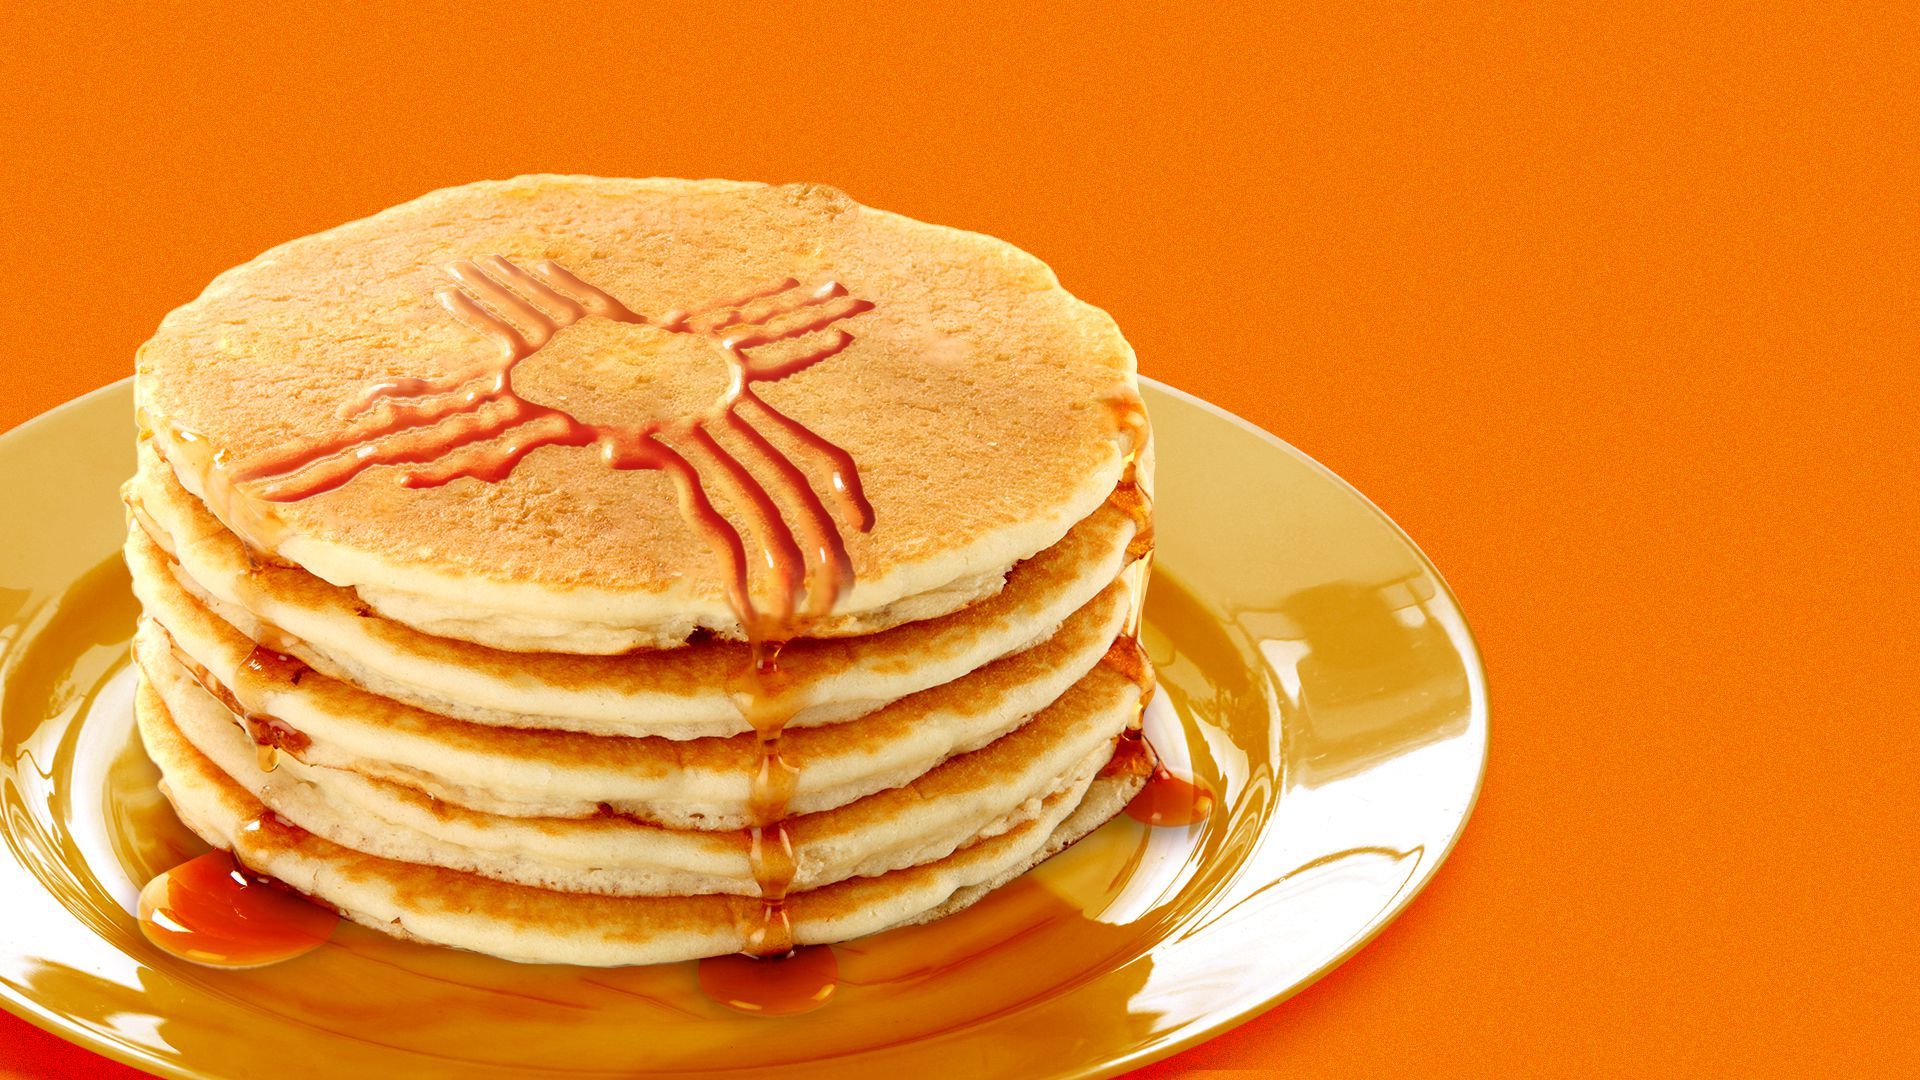 Illustration of a stack of pancakes with maple syrup drizzled on top in the shape of the Zia sun symbol from the New Mexico state flag 